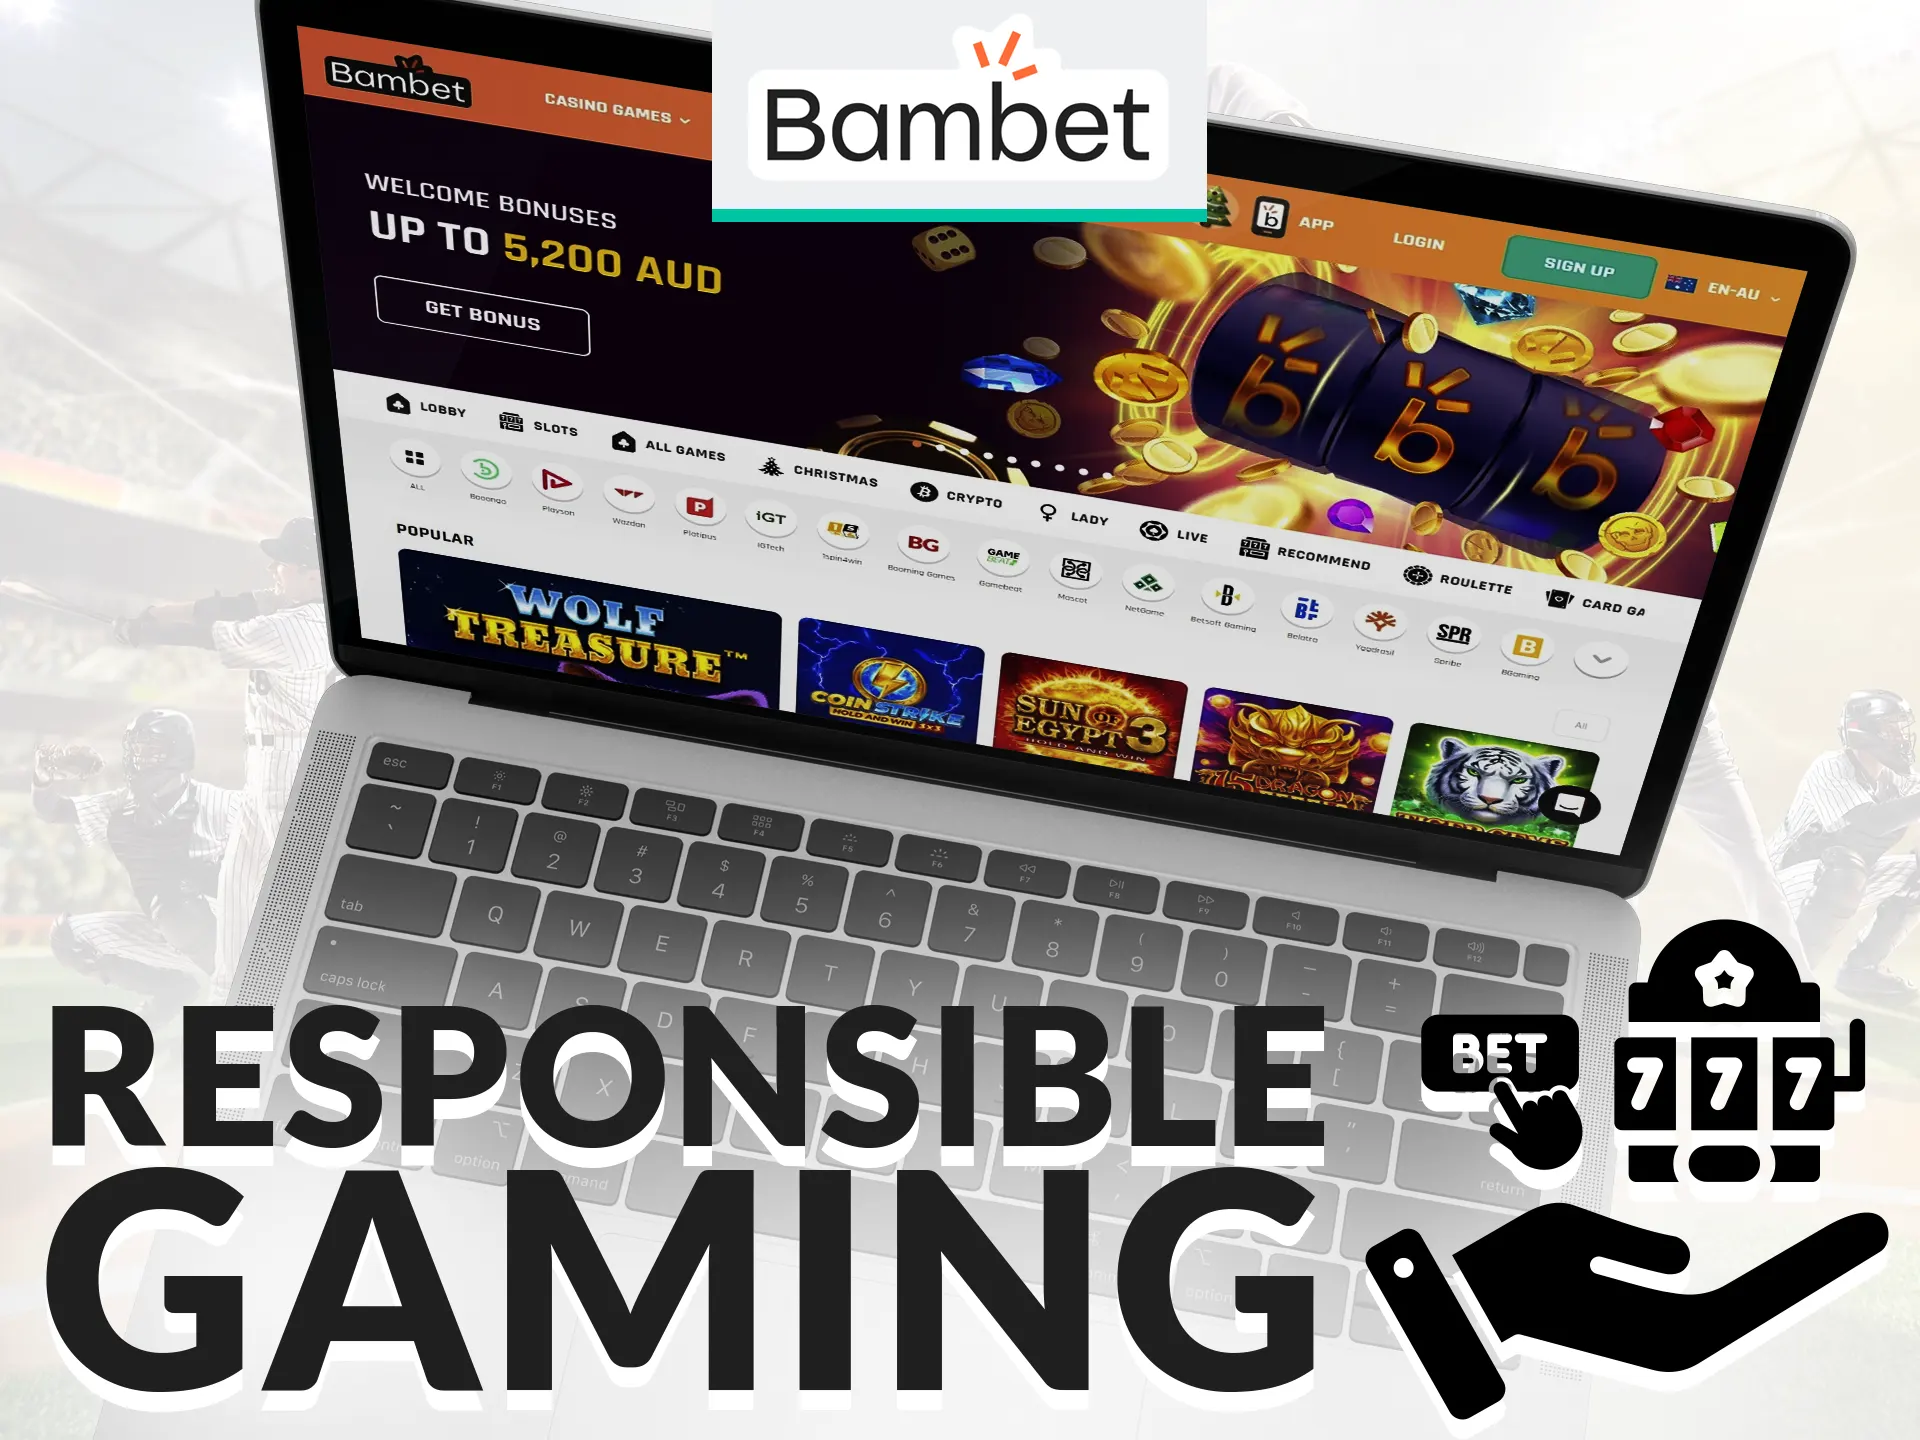 Bambet promotes safe gambling, offering resources to control and limit play responsibly.